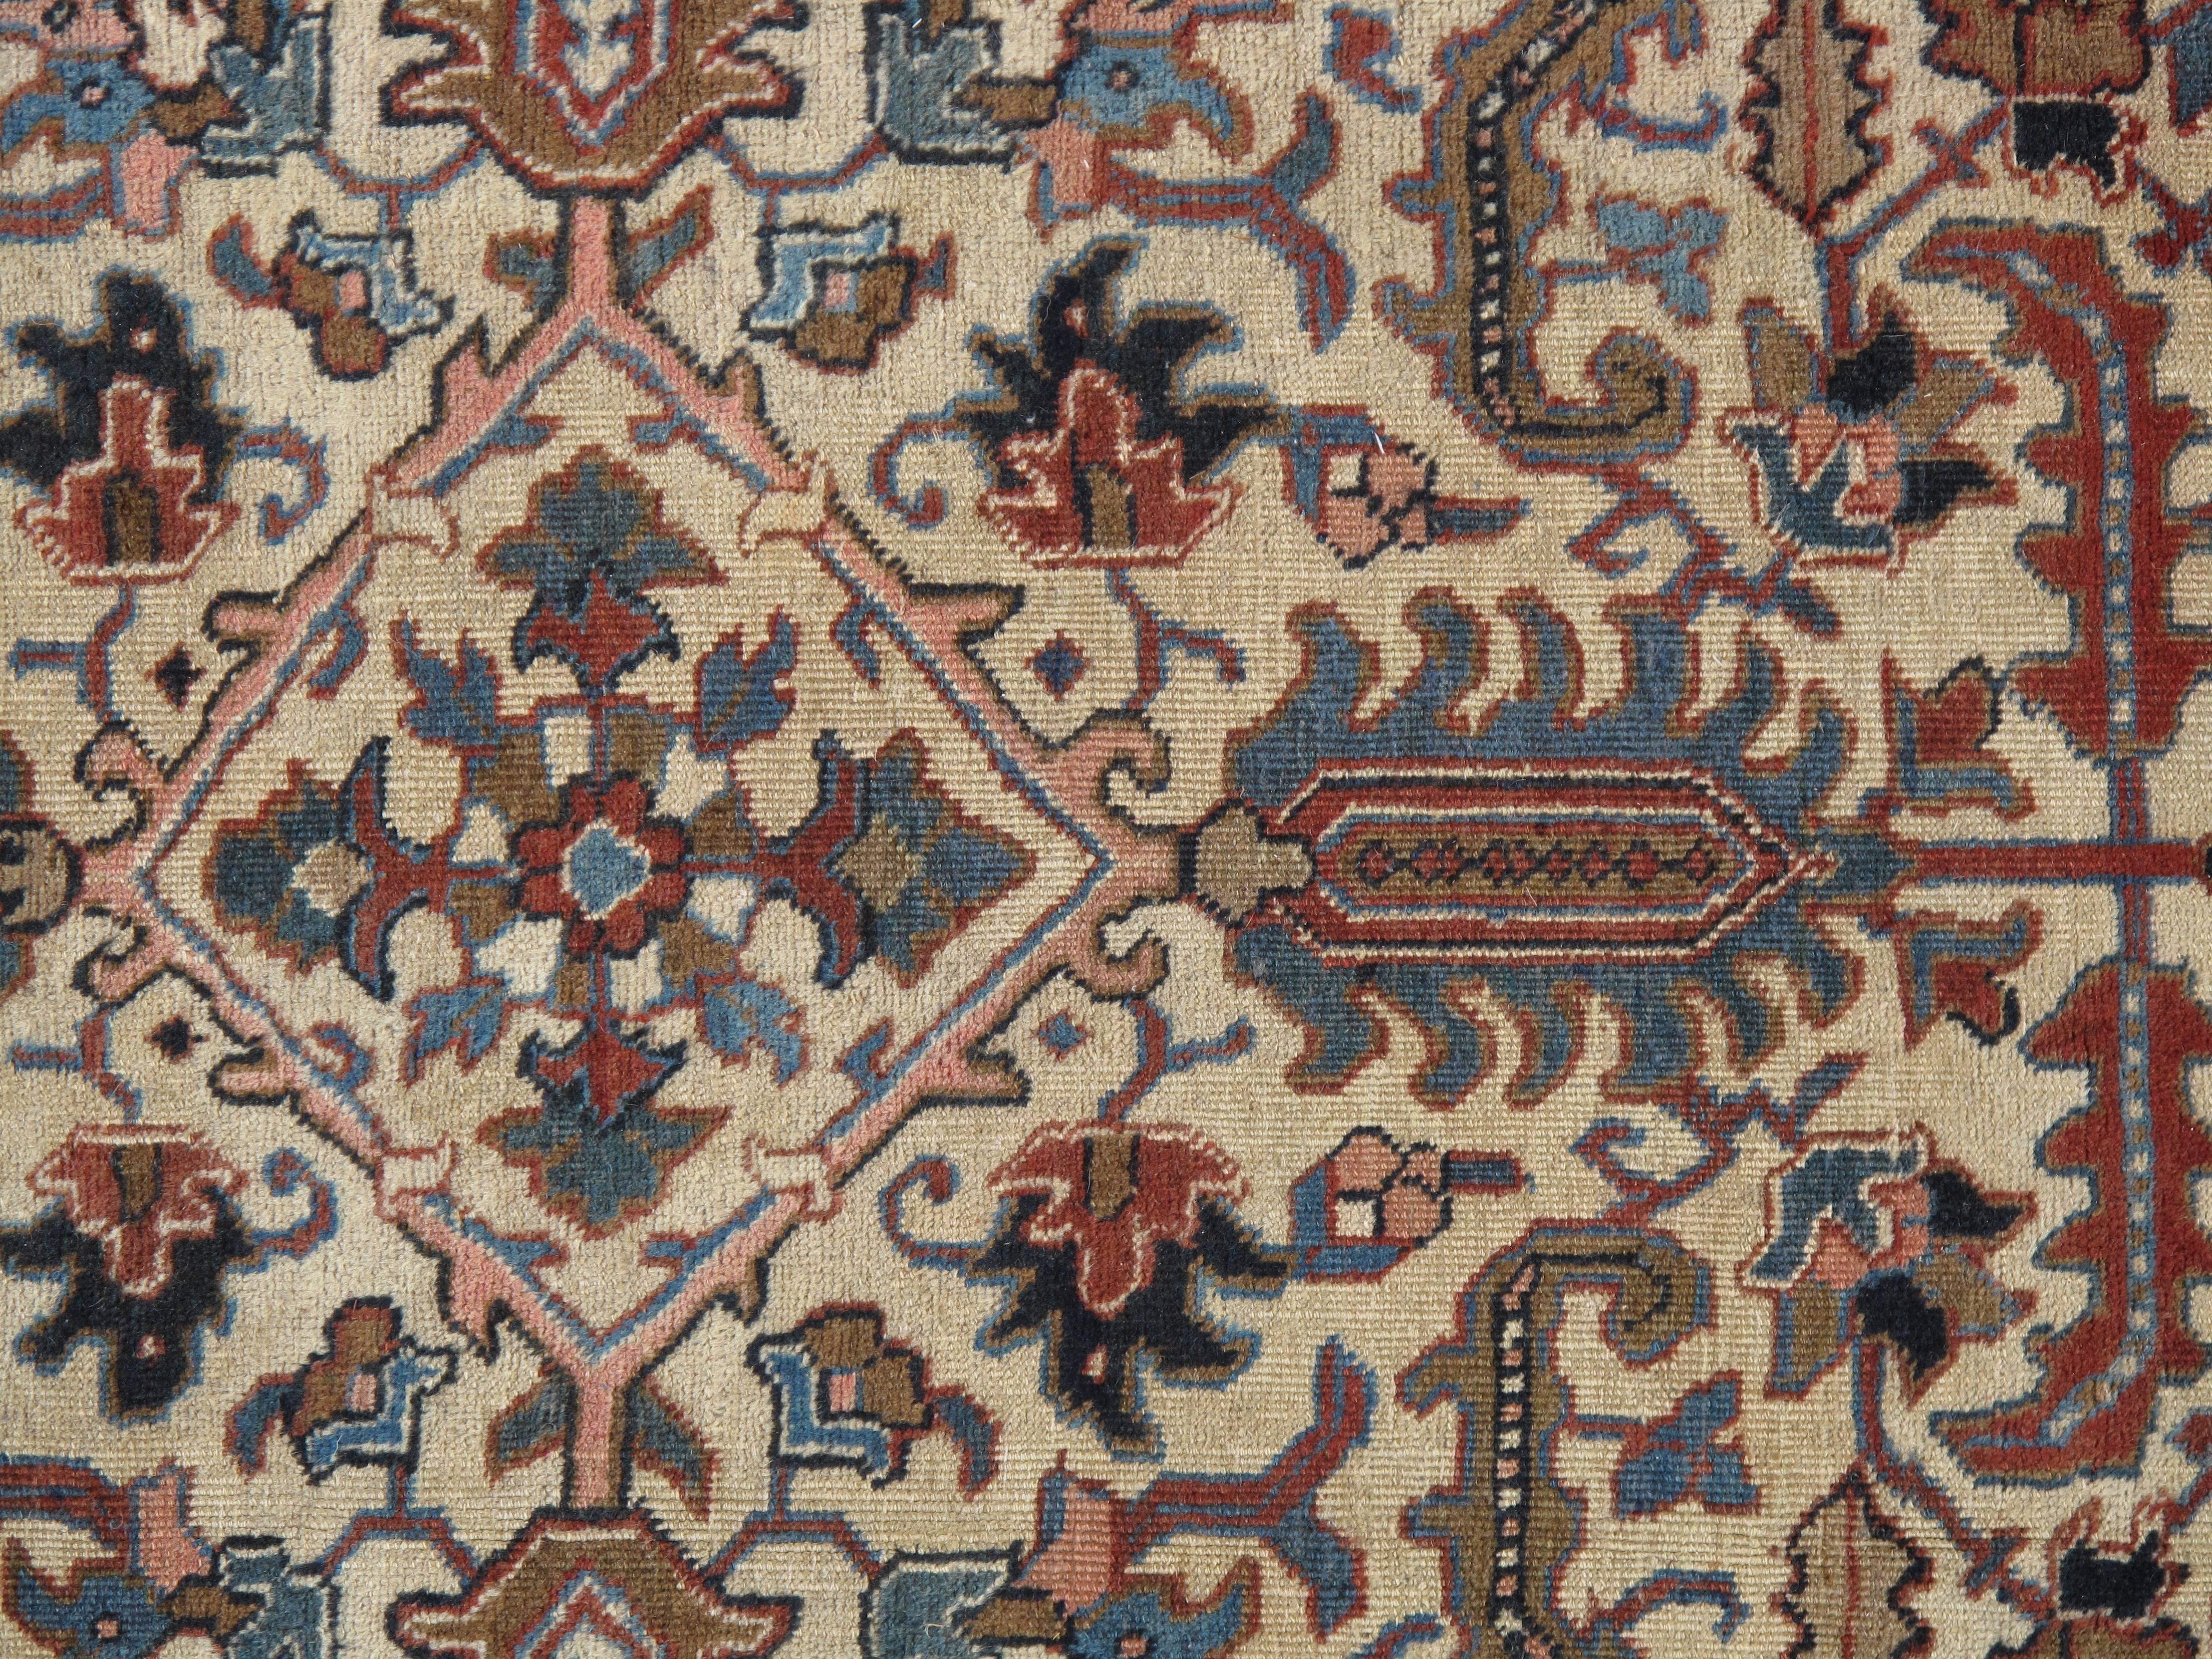 Heriz carpets are the staple of the furnishing market and remain the most popular of all NW Persian Carpets. They were produced for the rapidly growing US market in the late 19th-early 20th centuries. In home design, Heriz carpets are beloved for